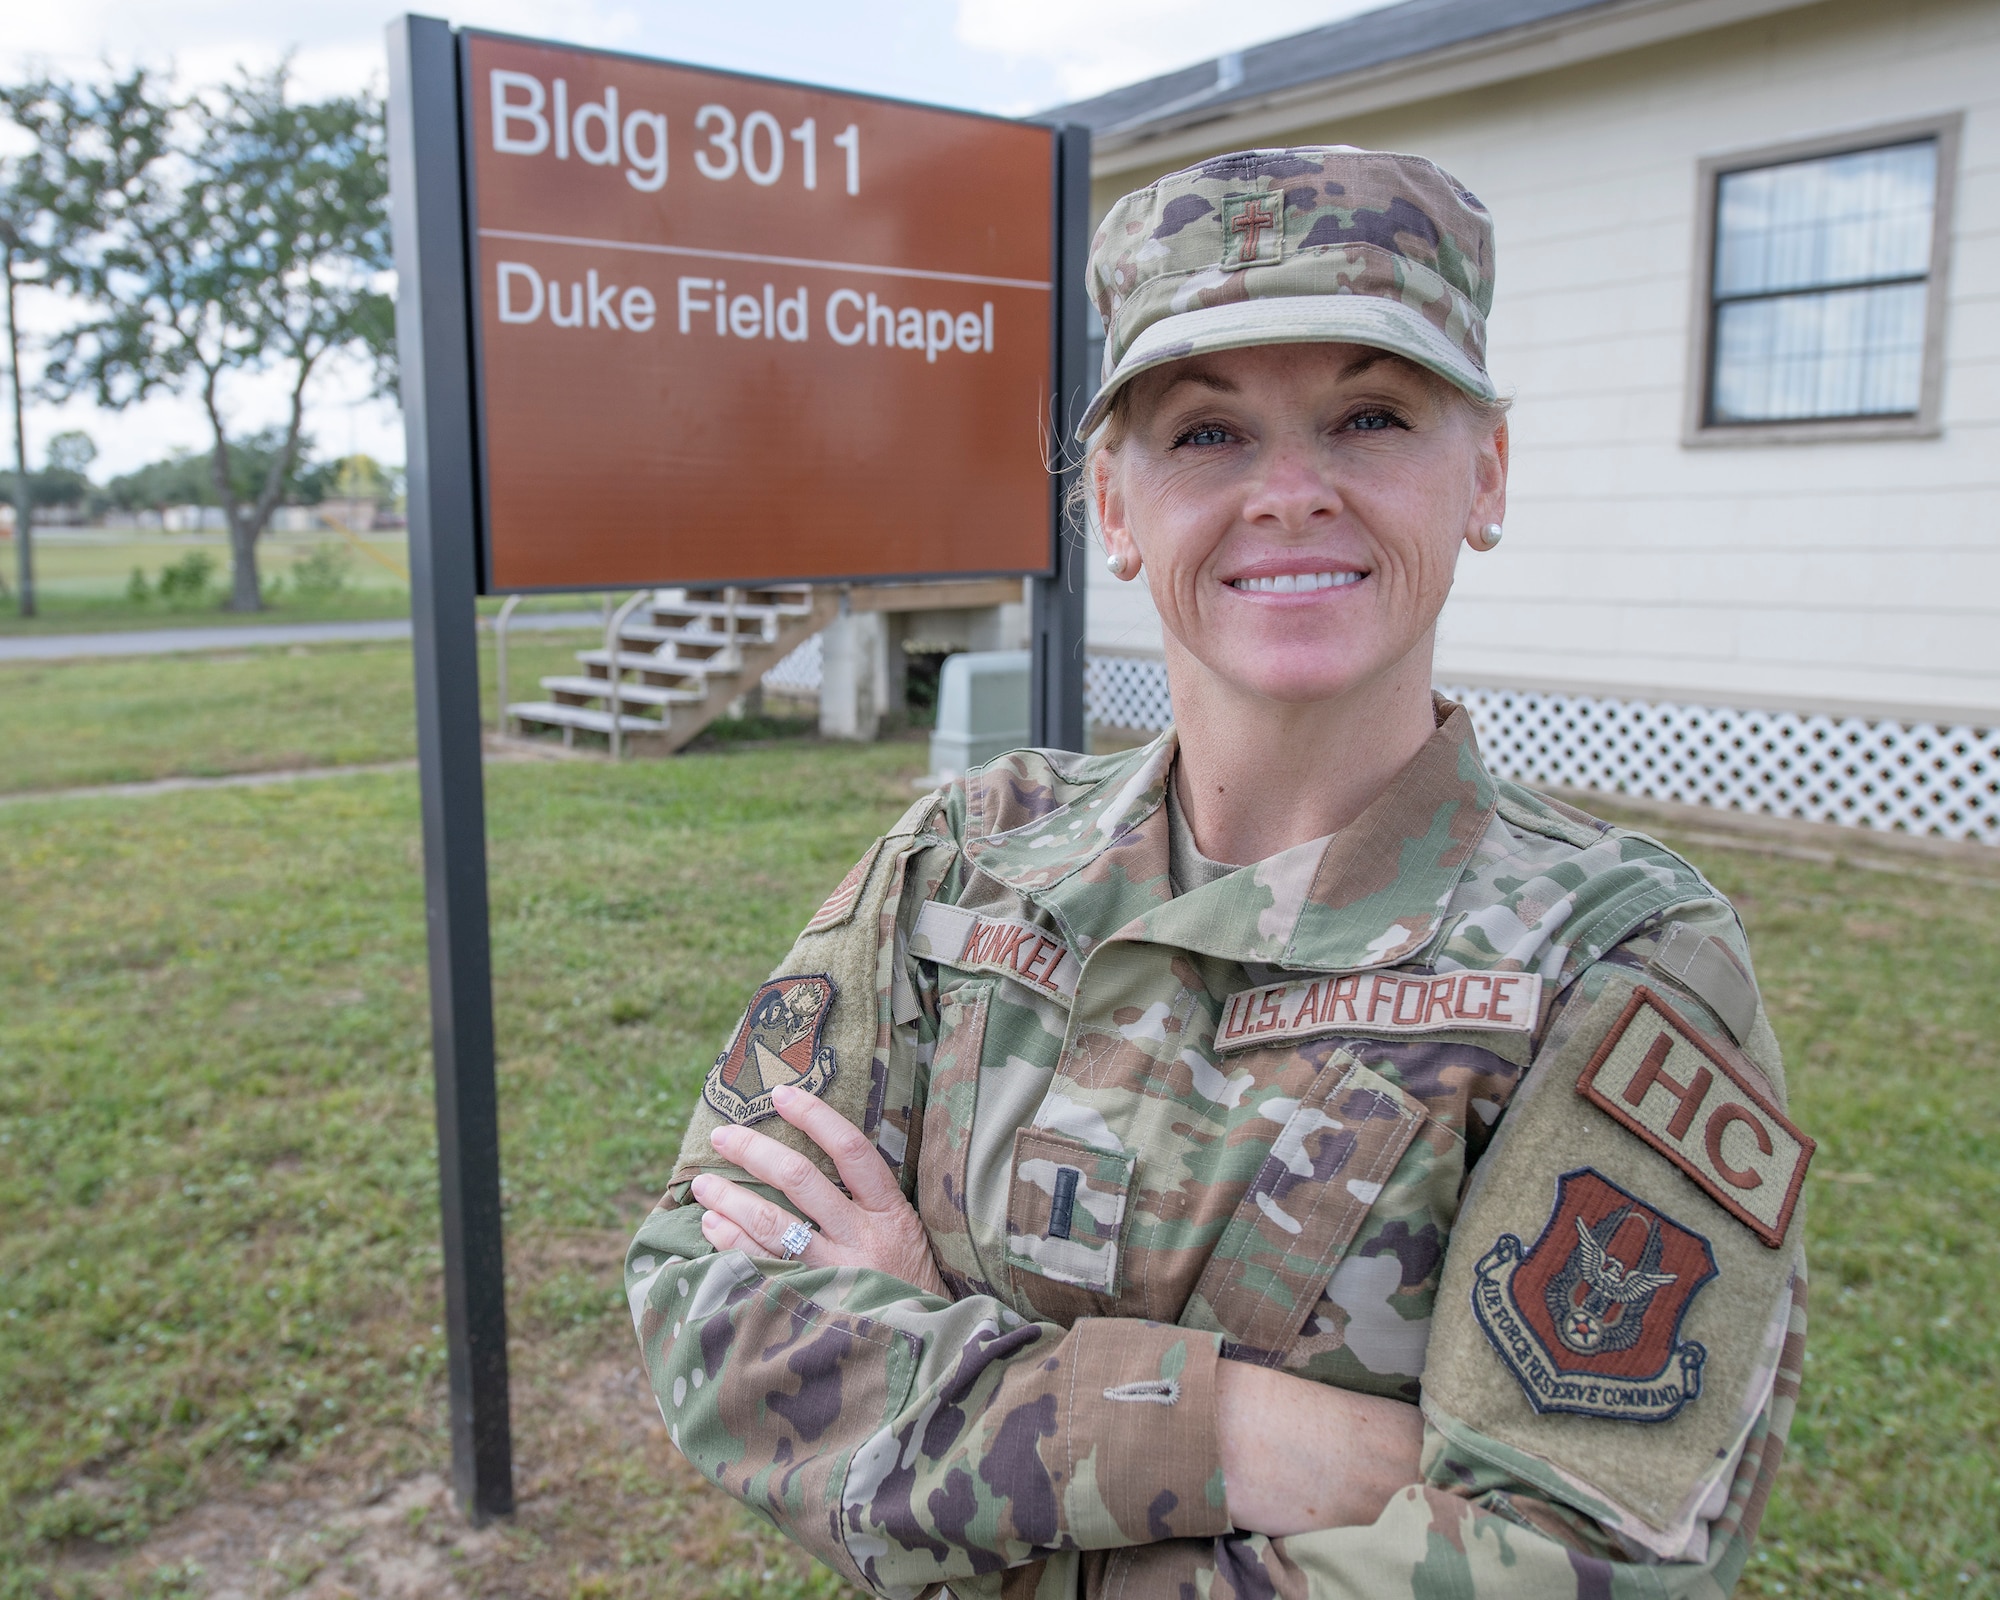 A female, military chaplain stands and poses in front of the chapel sign.